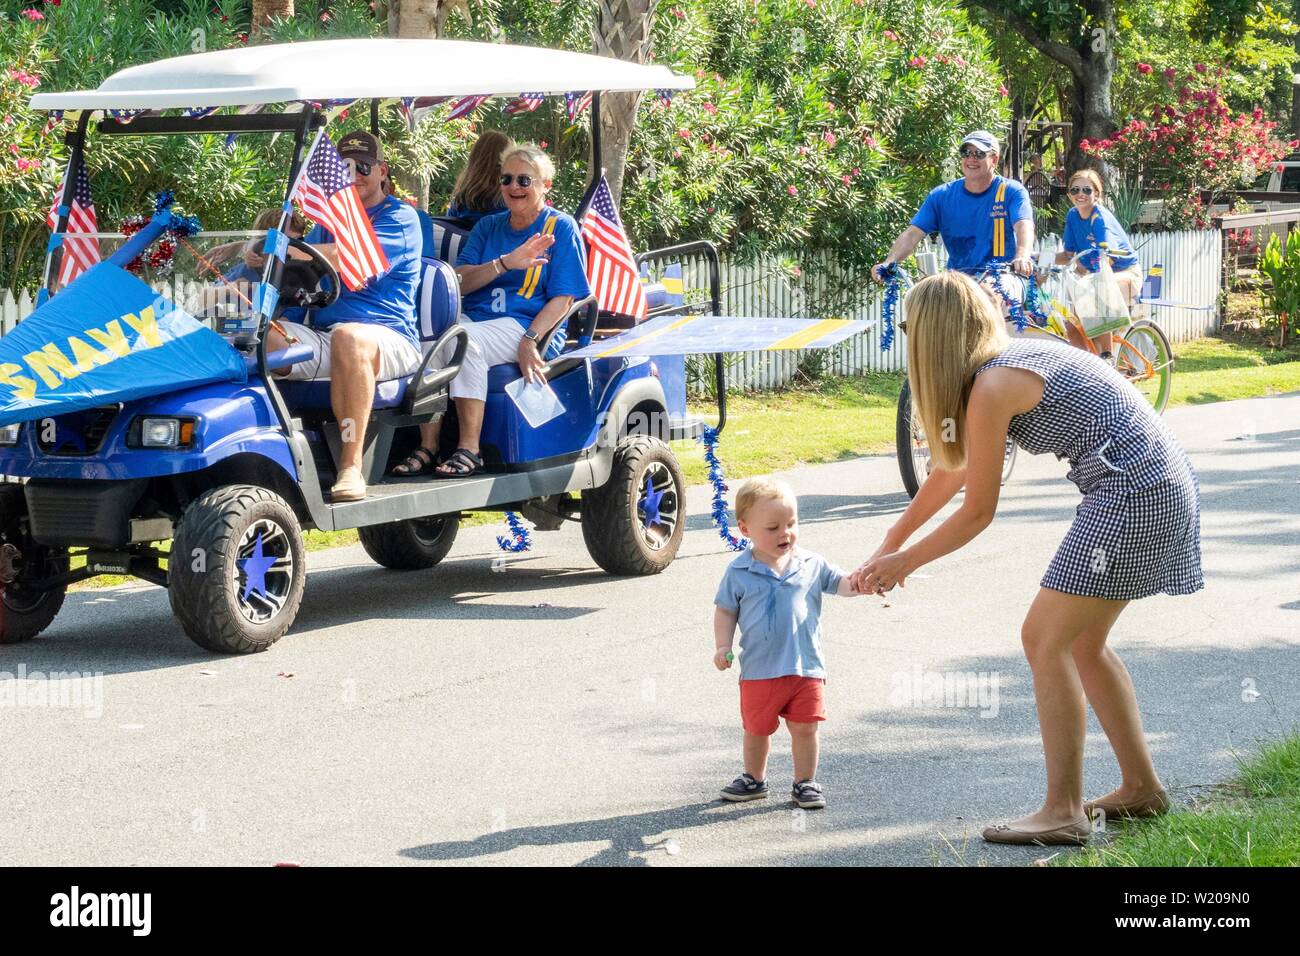 Sullivans Island South Carolina, USA. 4th July, 2019. Families take part in the annual Independence Day golf cart and bicycle parade July 4, 2019 in Sullivan's Island, South Carolina. The tiny affluent Sea Island beach community across from Charleston holds an outsized golf cart parade featuring more than 75 decorated carts. Credit: Planetpix/Alamy Live News Stock Photo